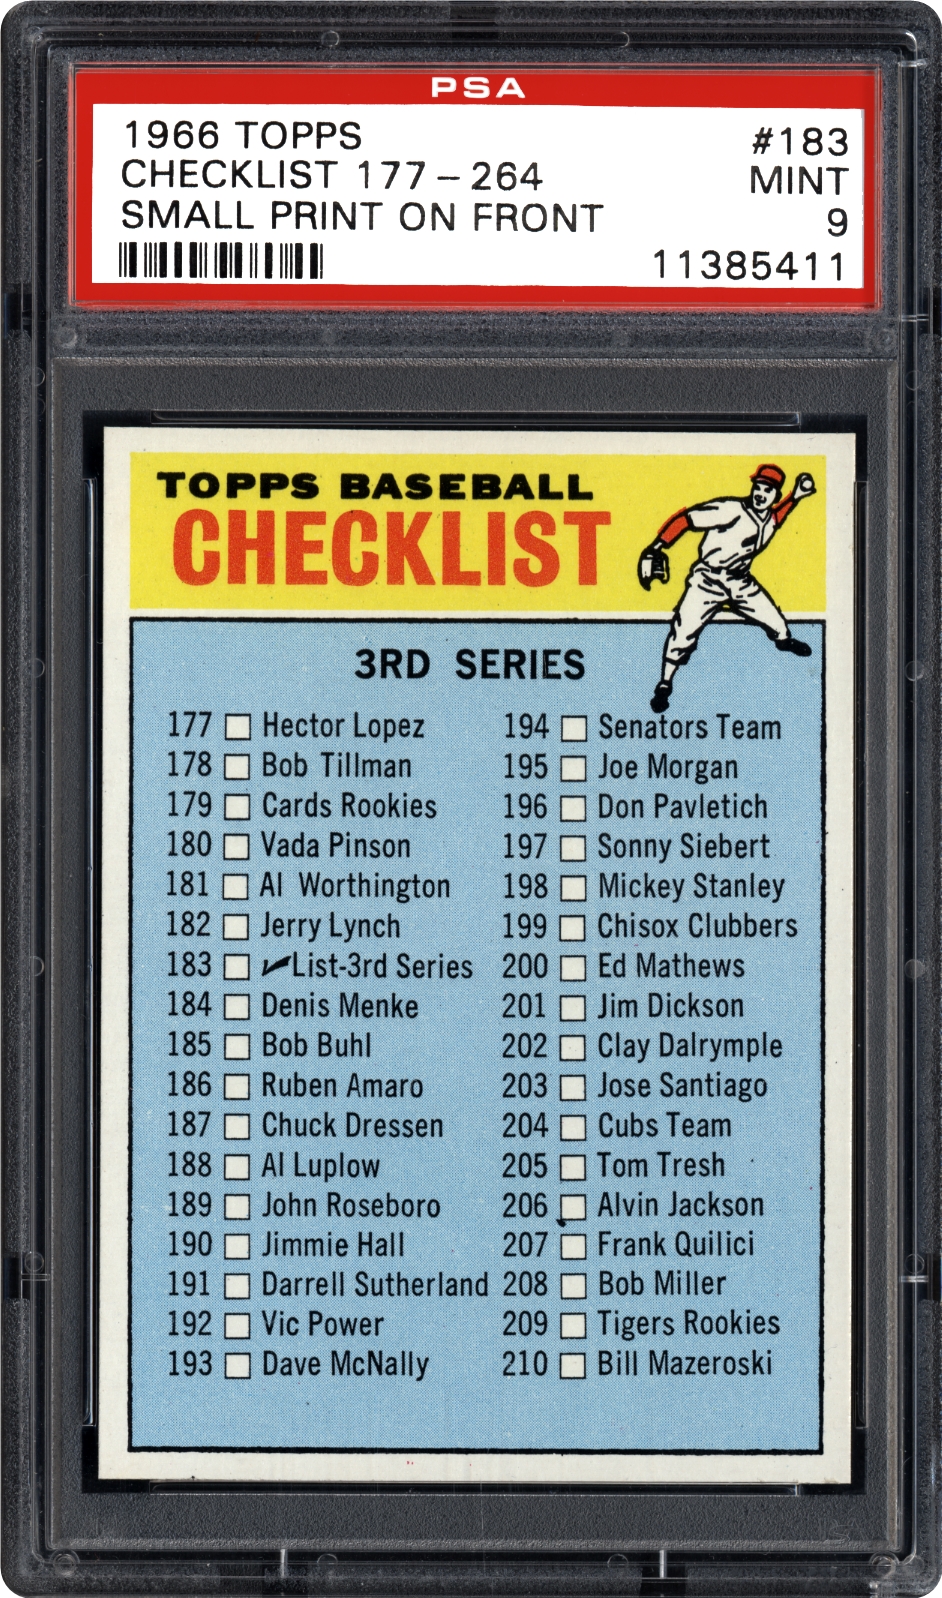 1966 Topps Checklist 177264 (Small Print On Front) PSA CardFacts™